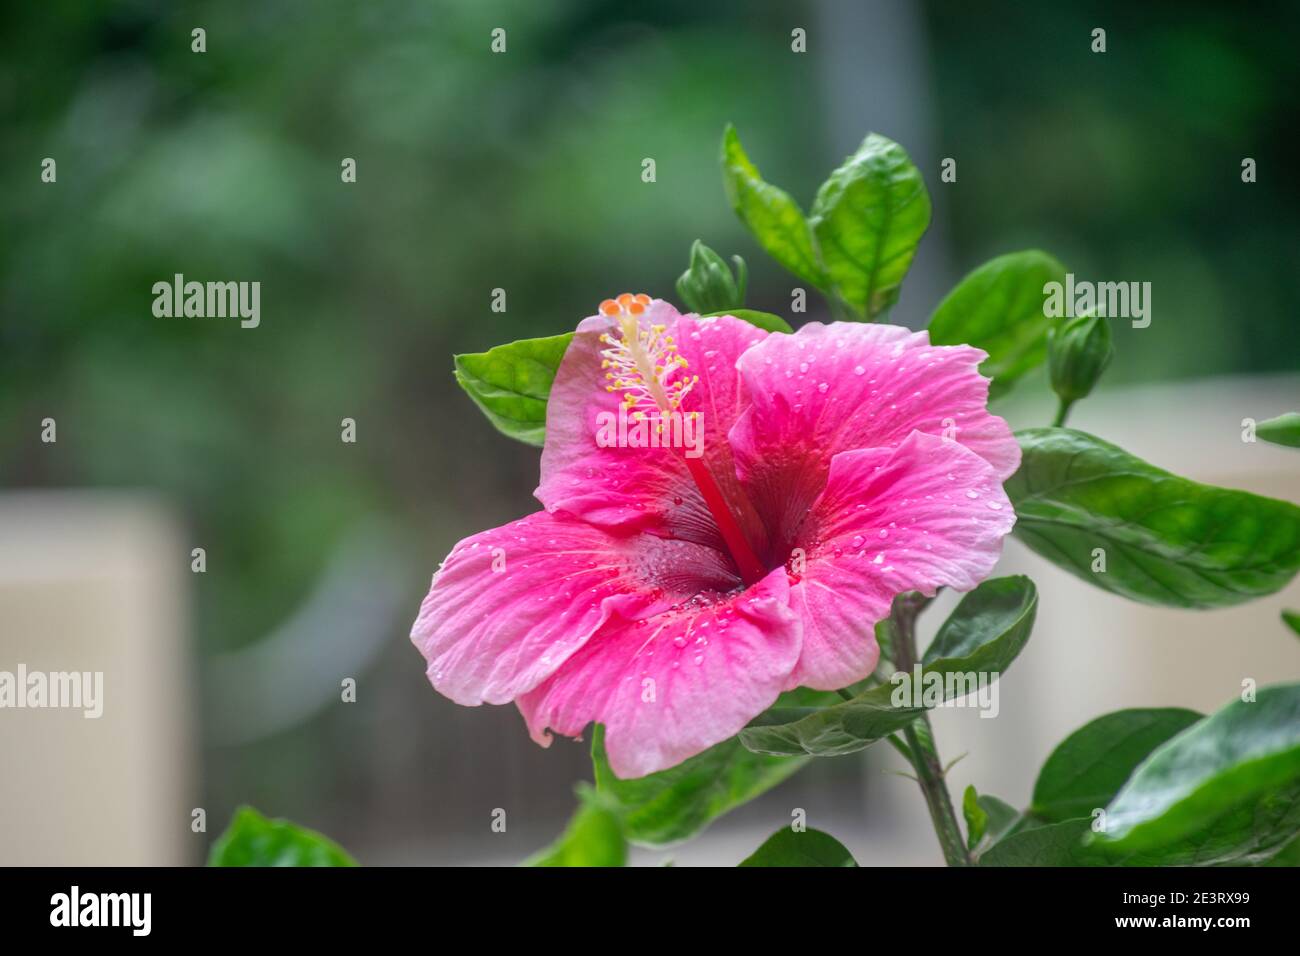 Pinkish colored flower Hibiscus rosa-sinensis, known as Chinese hibiscus, China rose, Hawaiian hibiscus, rose mallow, shoeblack plant, is a species of Stock Photo